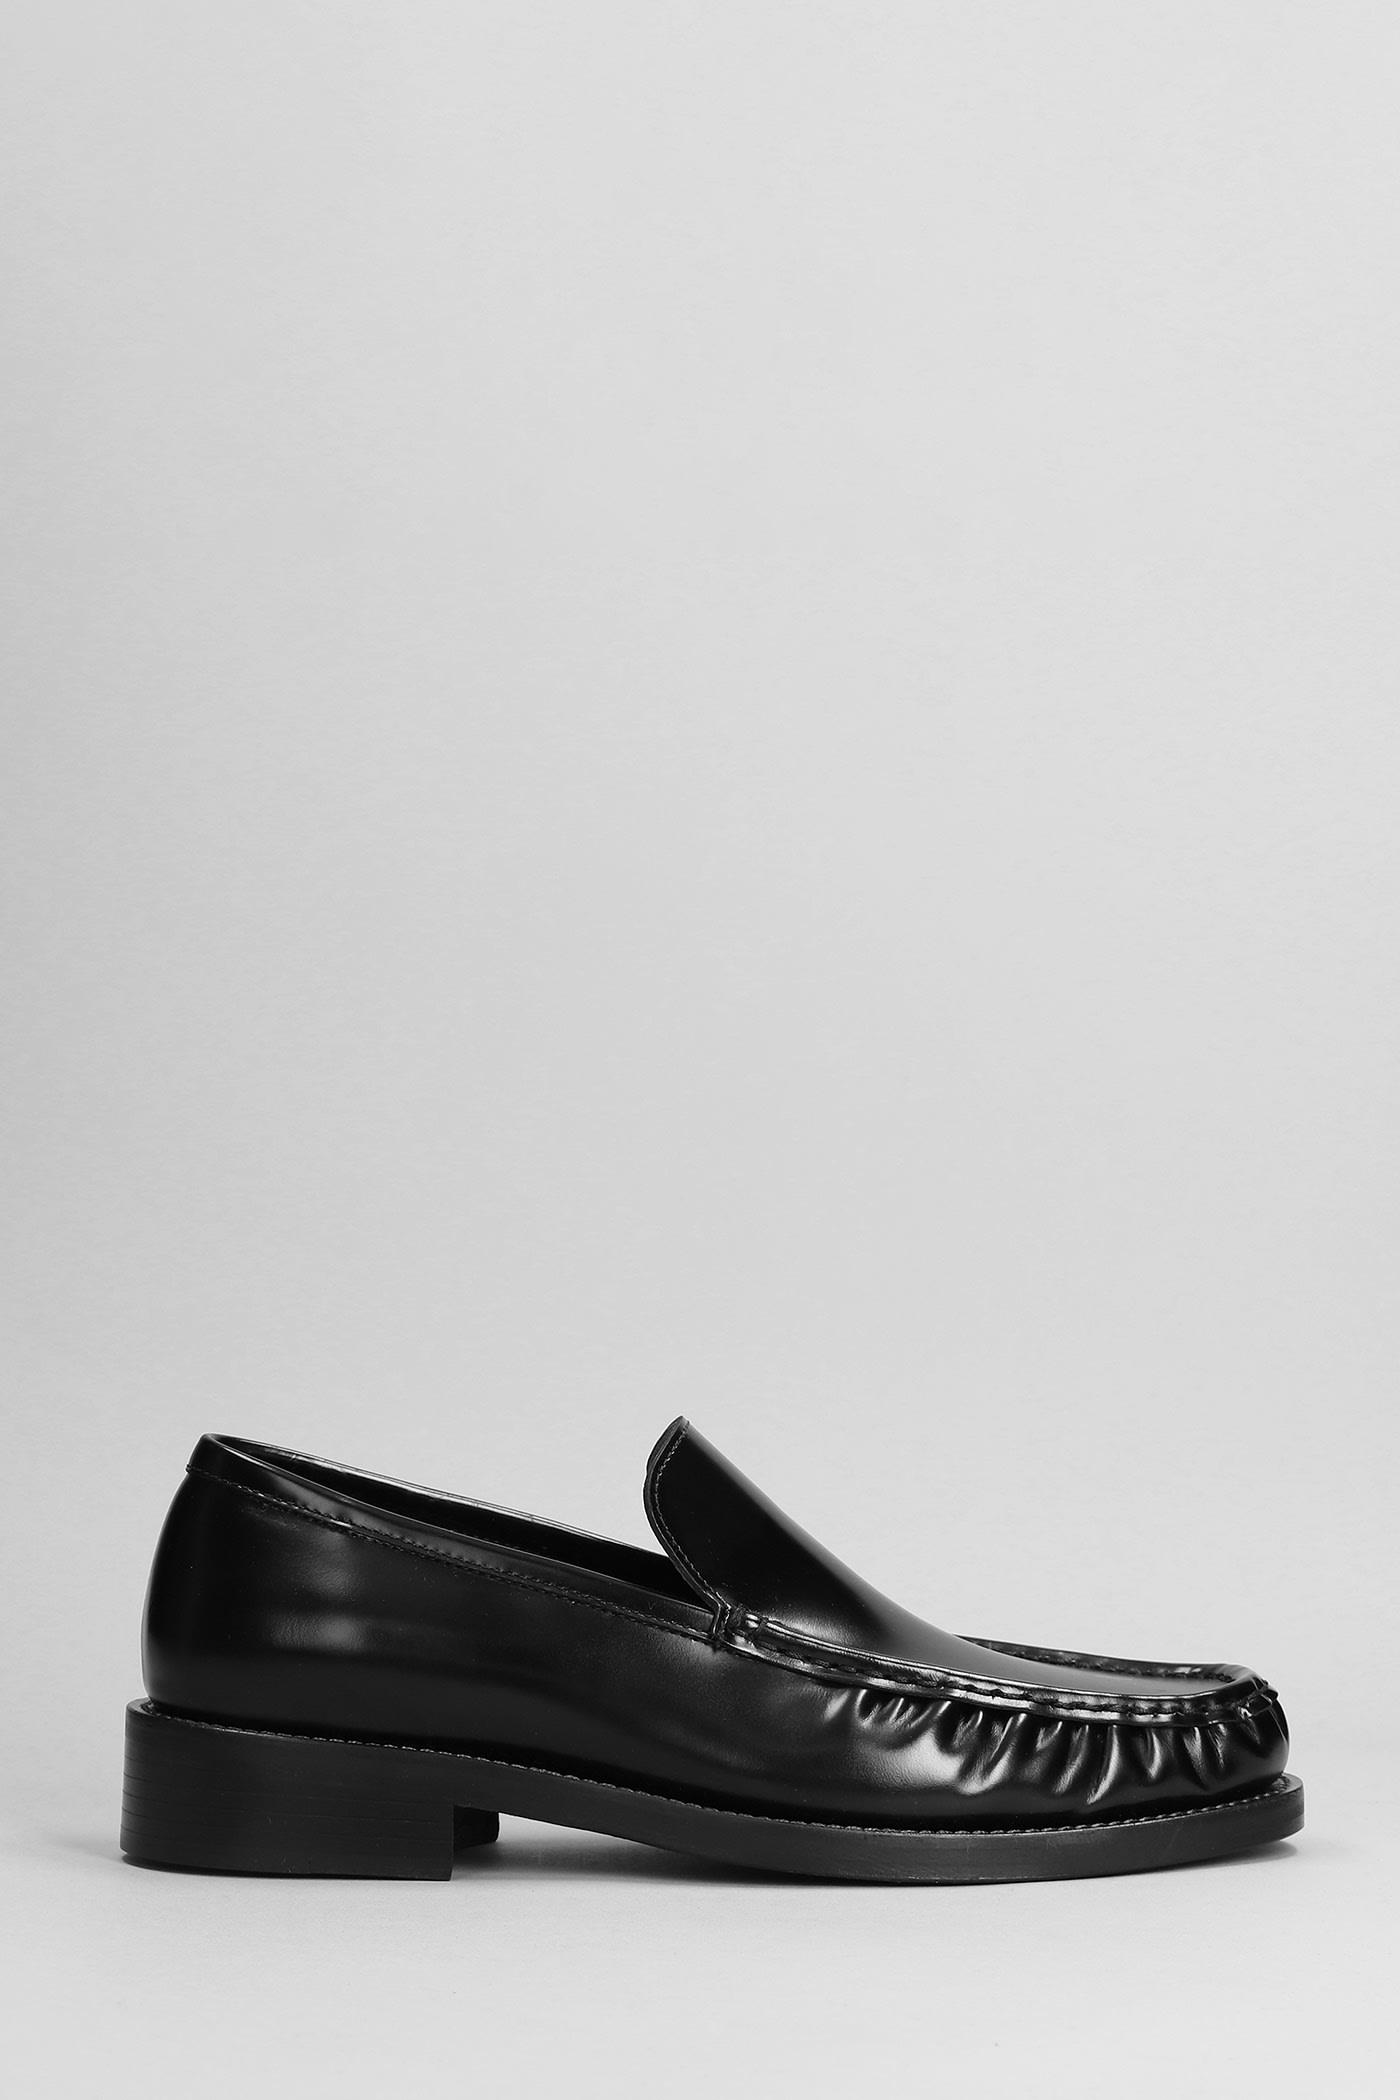 Acne Studios Loafers In Black Leather in Gray for Men | Lyst